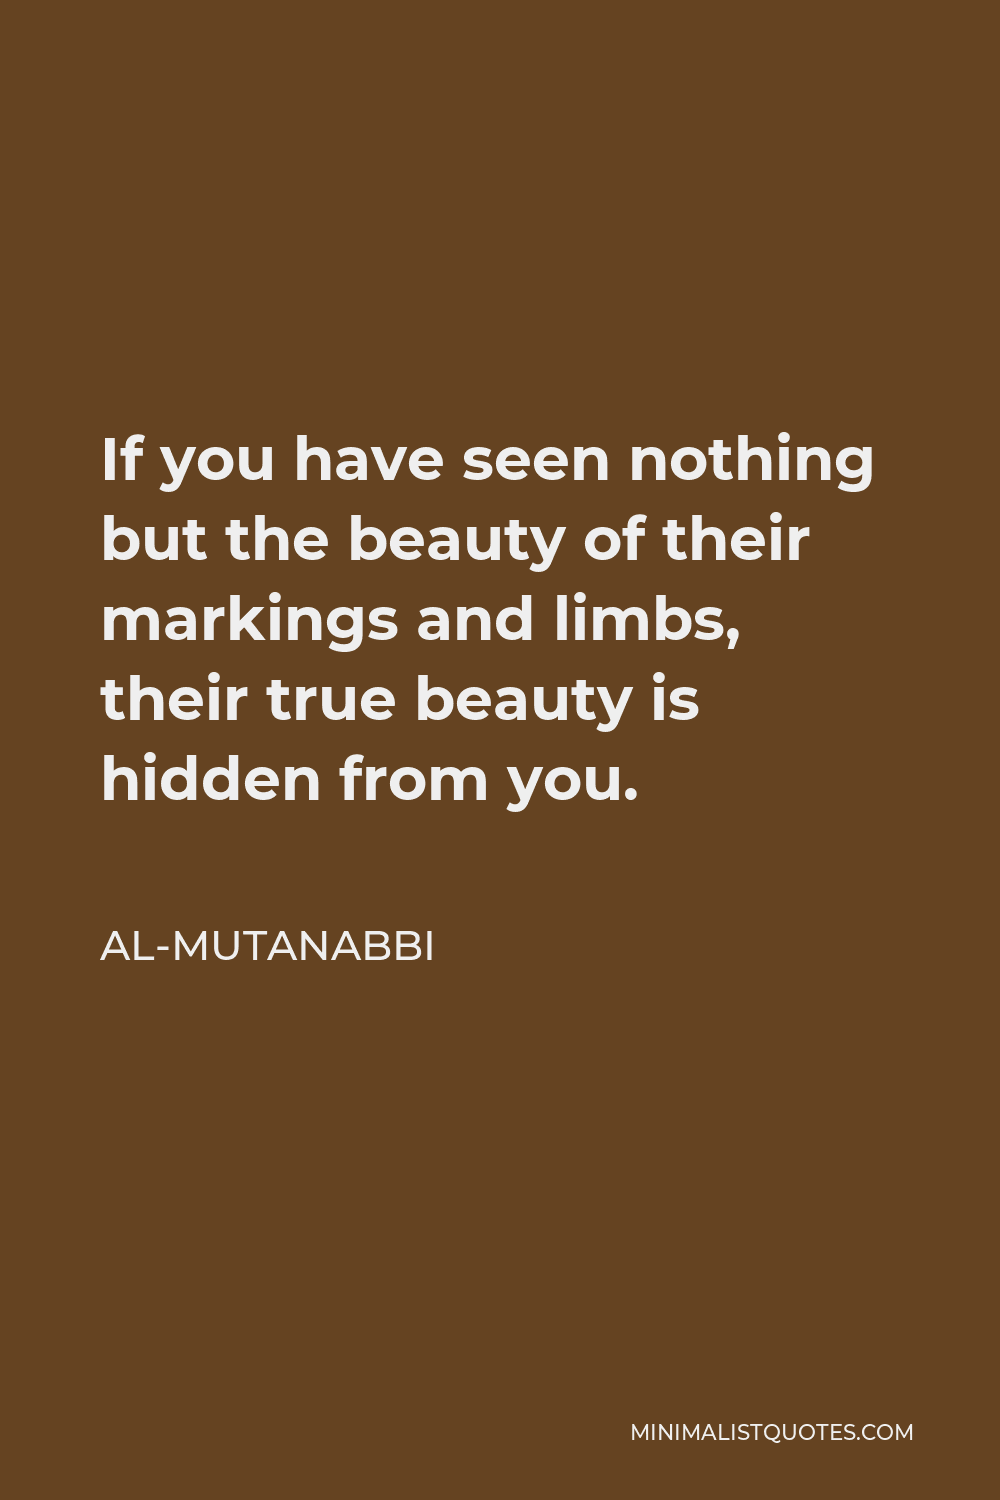 Al-Mutanabbi Quote - If you have seen nothing but the beauty of their markings and limbs, their true beauty is hidden from you.